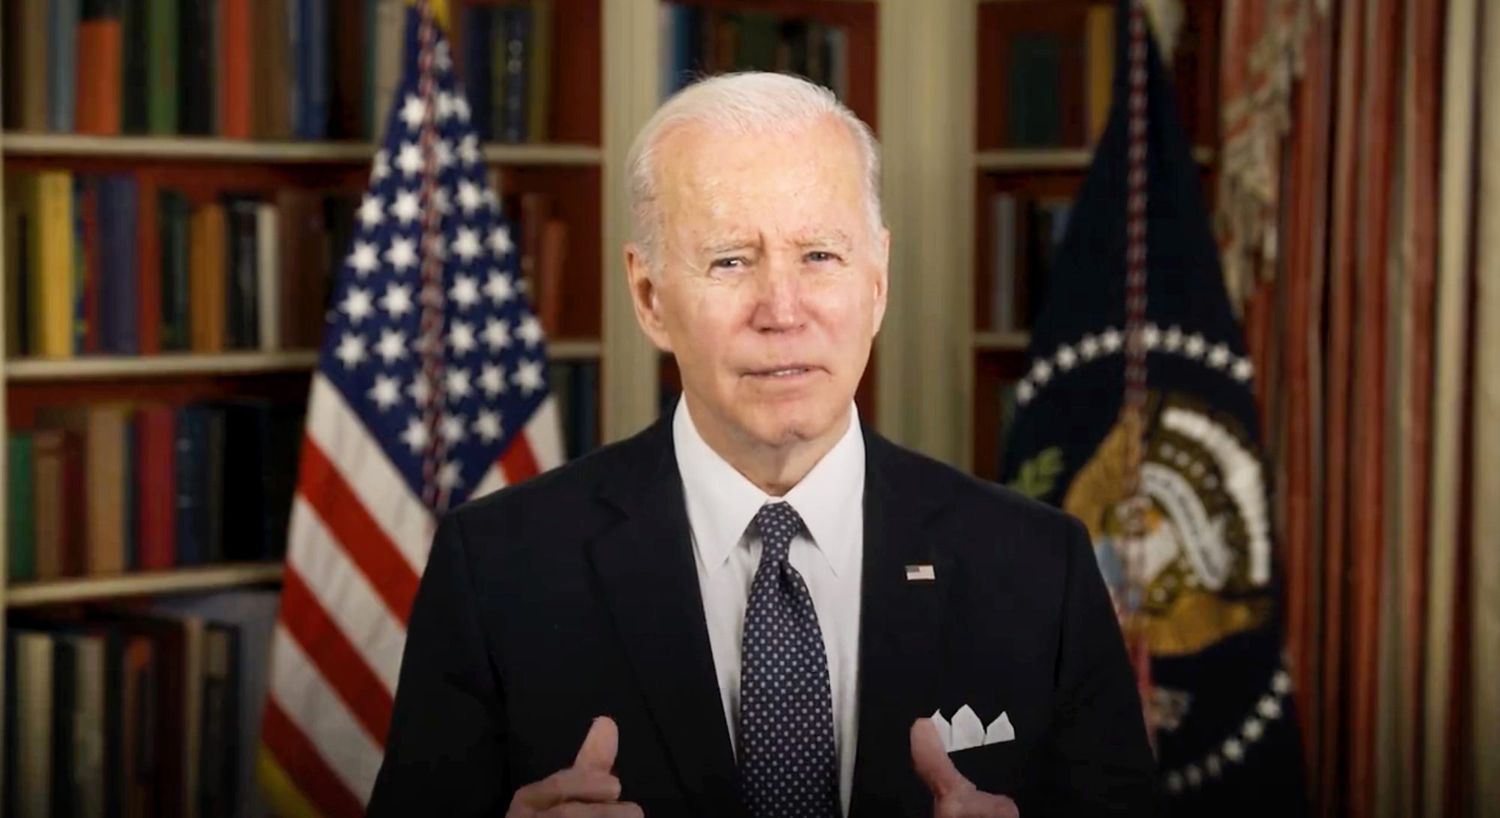 Republicans criticize timing, accusing Biden of undermining Easter traditions (Credits: POTUS)